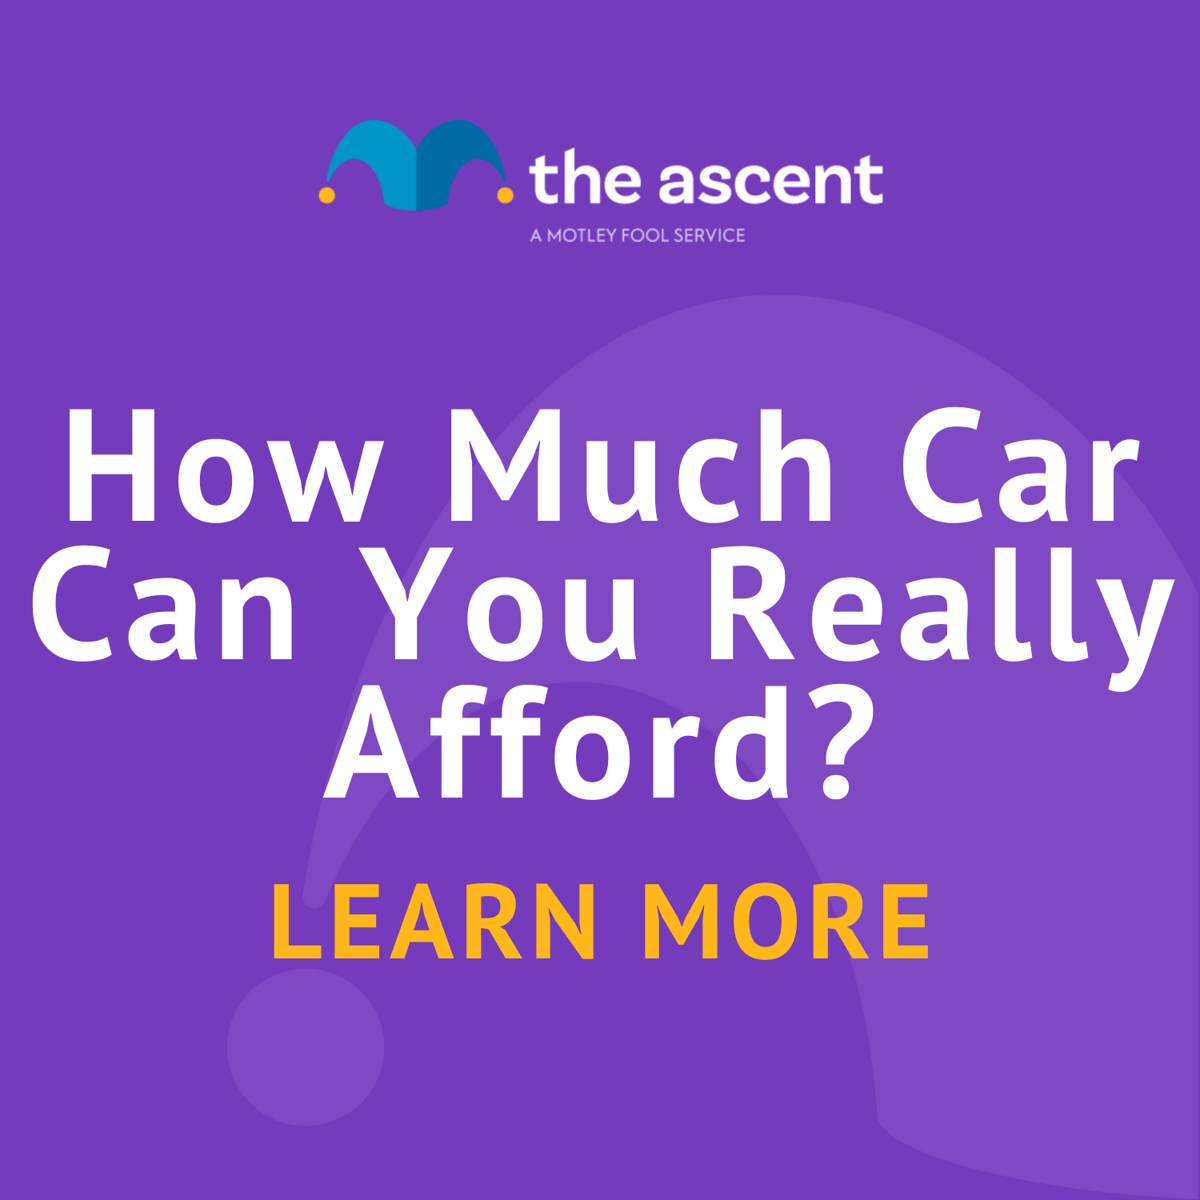 How Much Car Can I Afford?